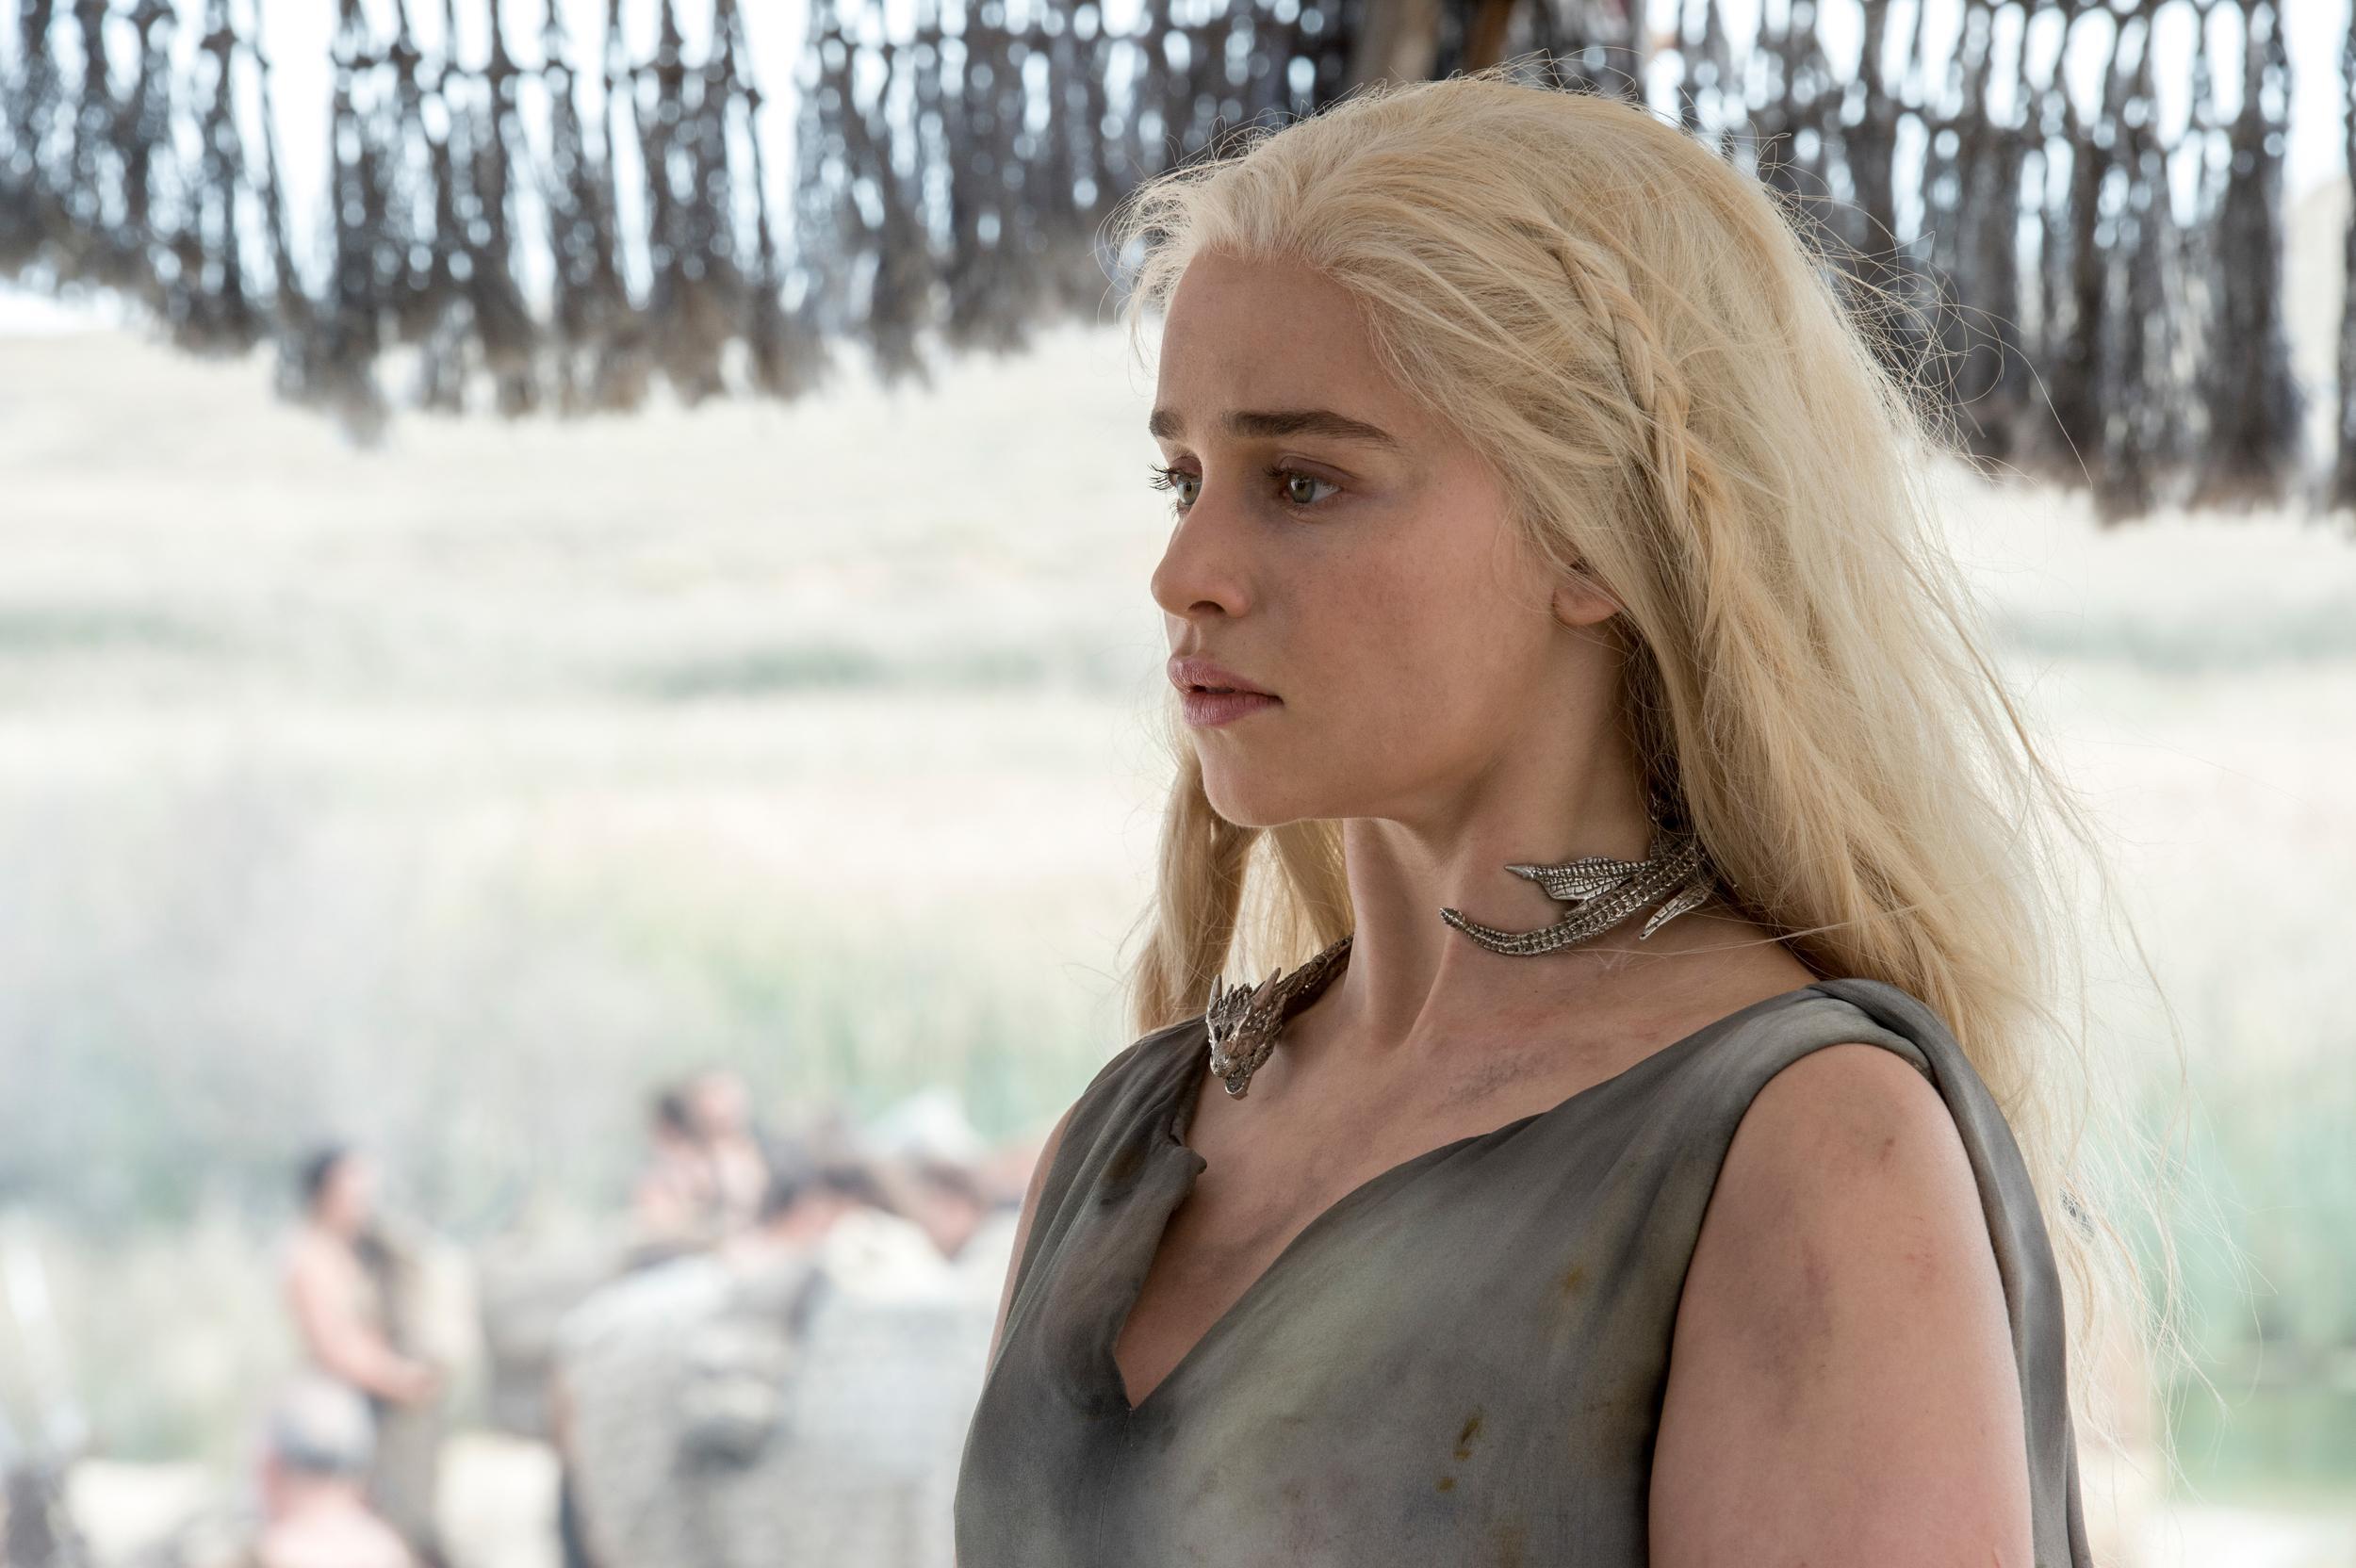 Free Nudism With Feeling - Emilia Clarke 'really annoyed' by Game of Thrones nudity ...